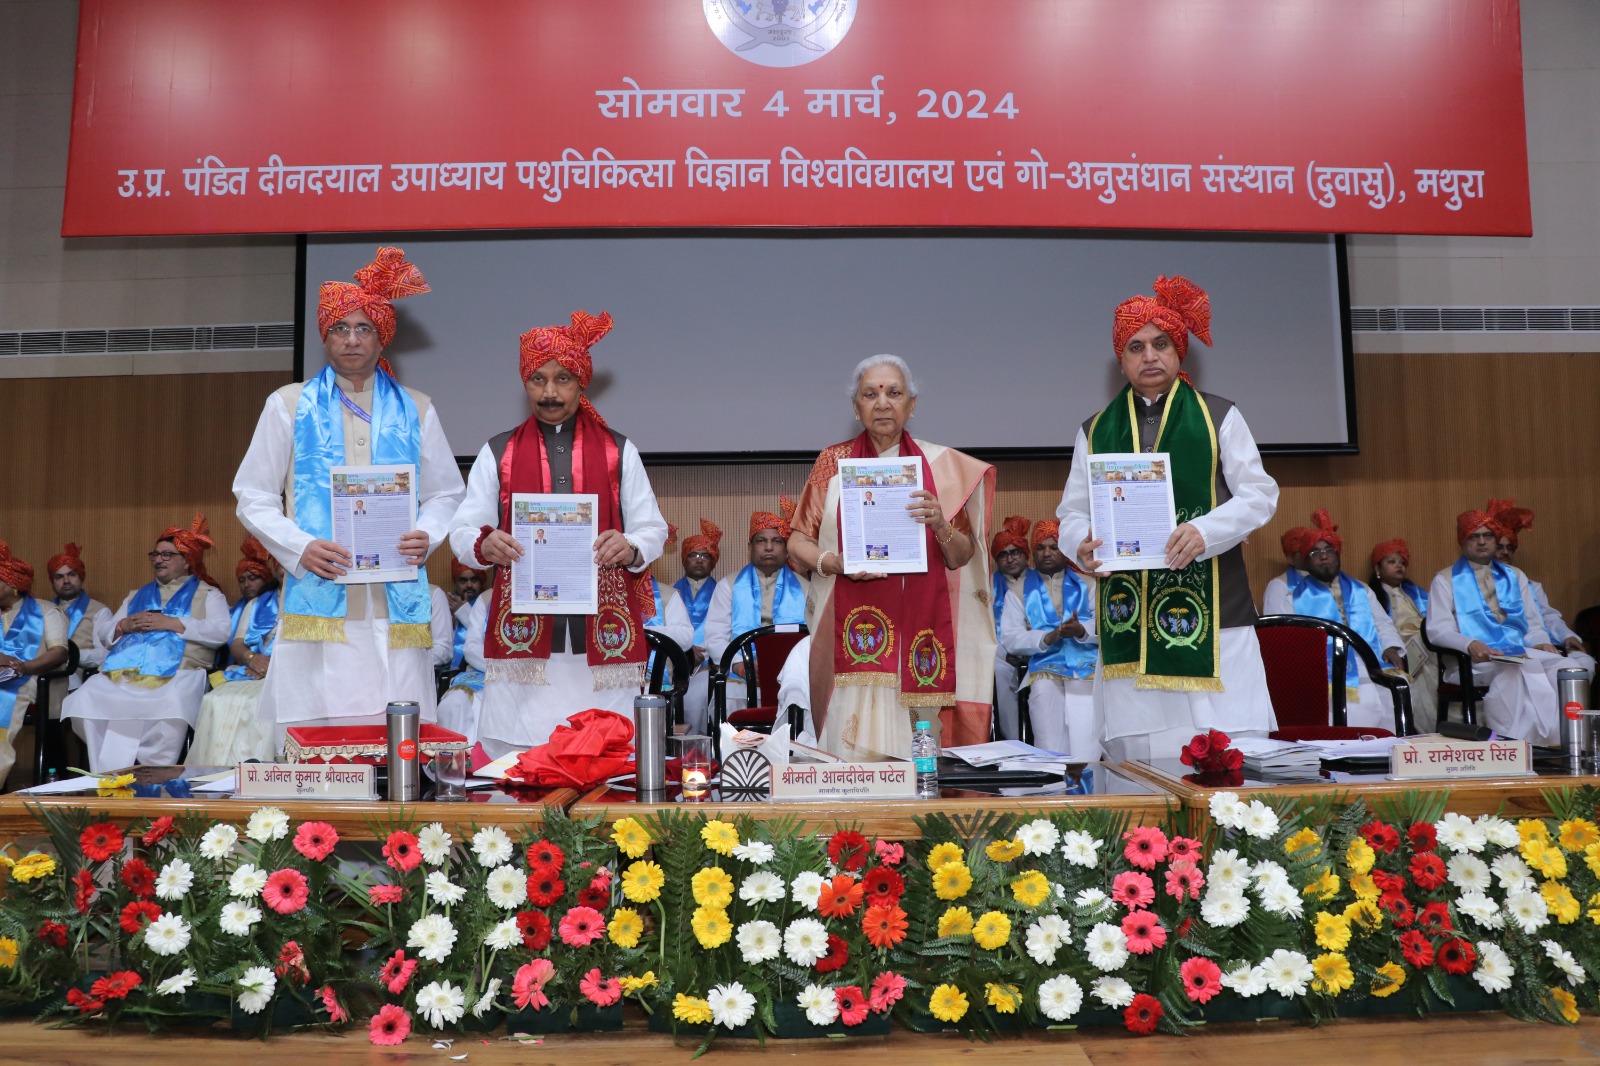 Glimpse of 13th Convocation held on 04th March, 2024